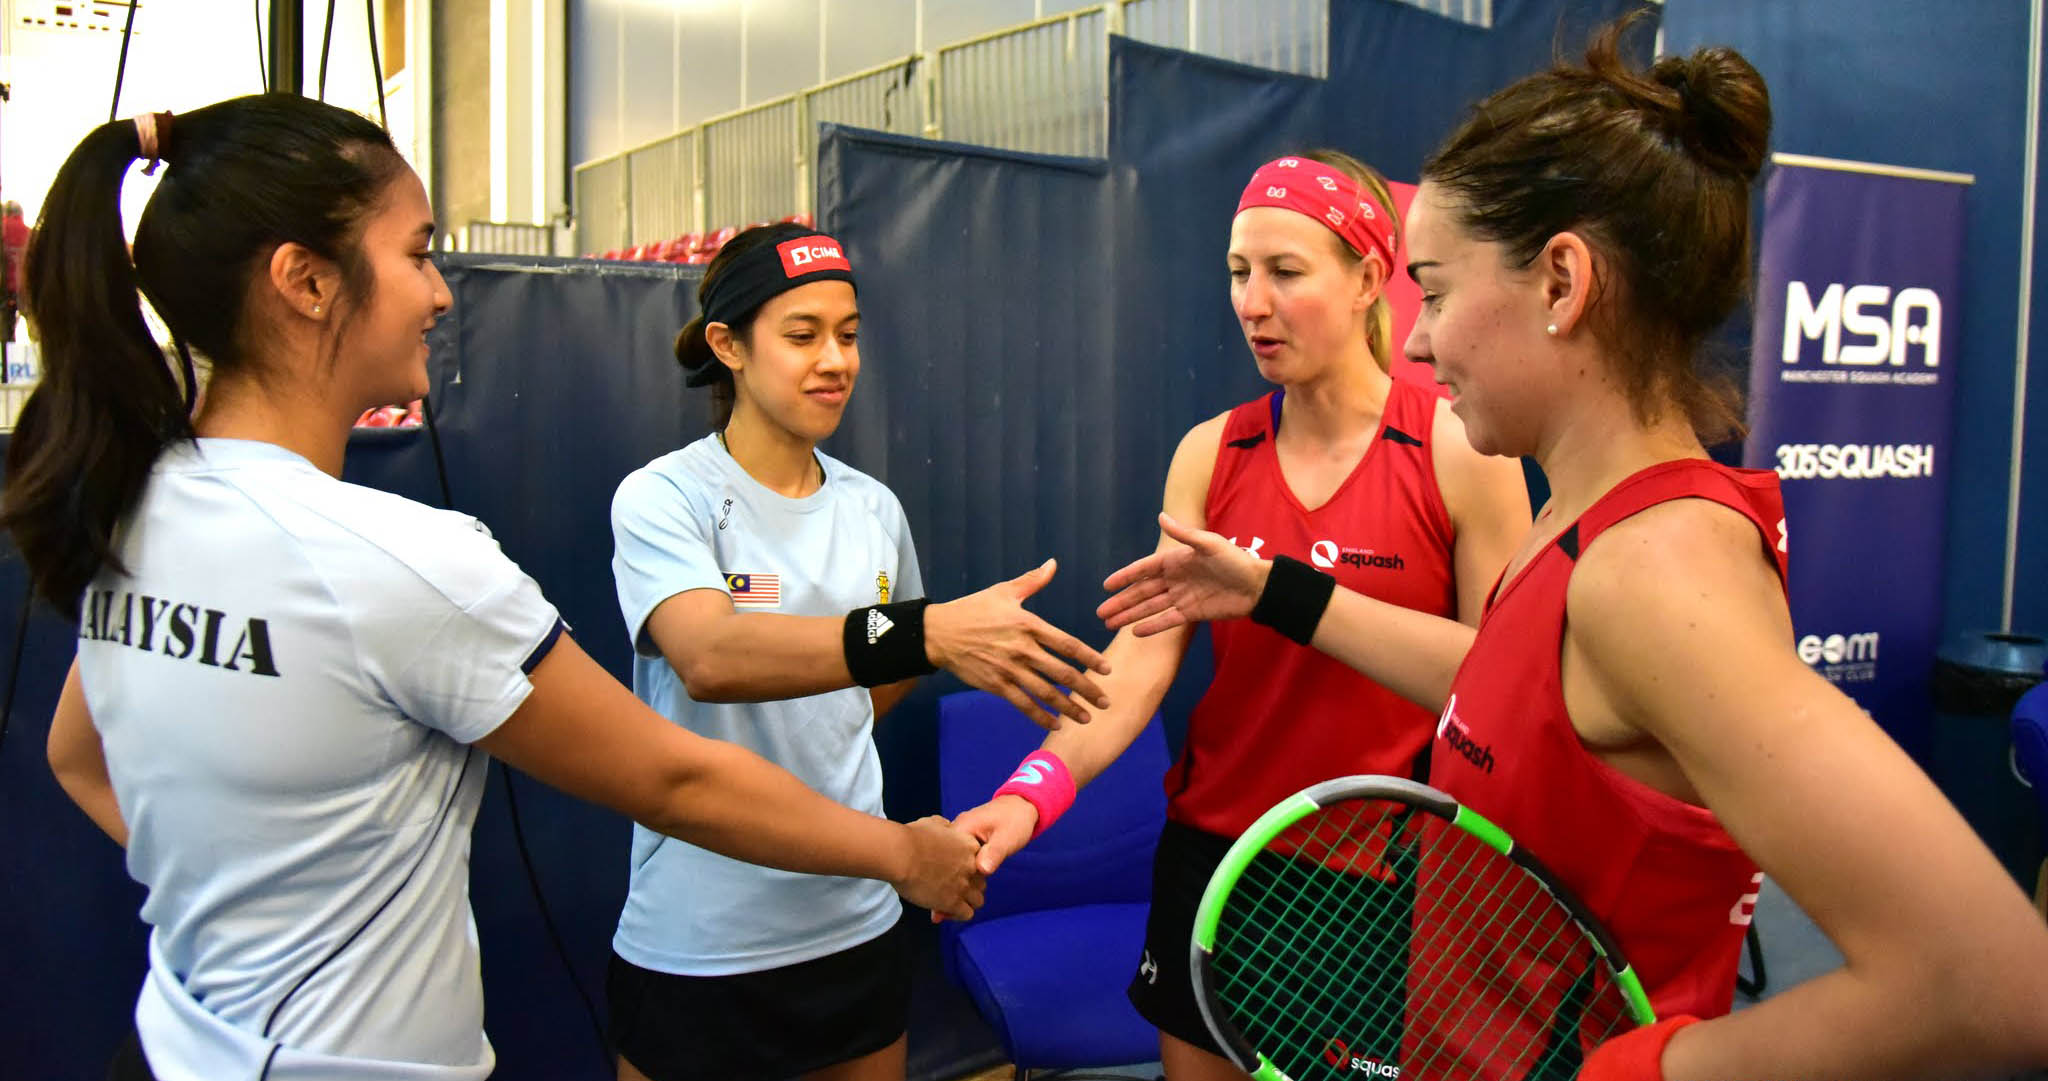 Rachel Arnold and Nicol David conceded their match against Alison Waters and Jenny Duncalf due to an injury to Arnold